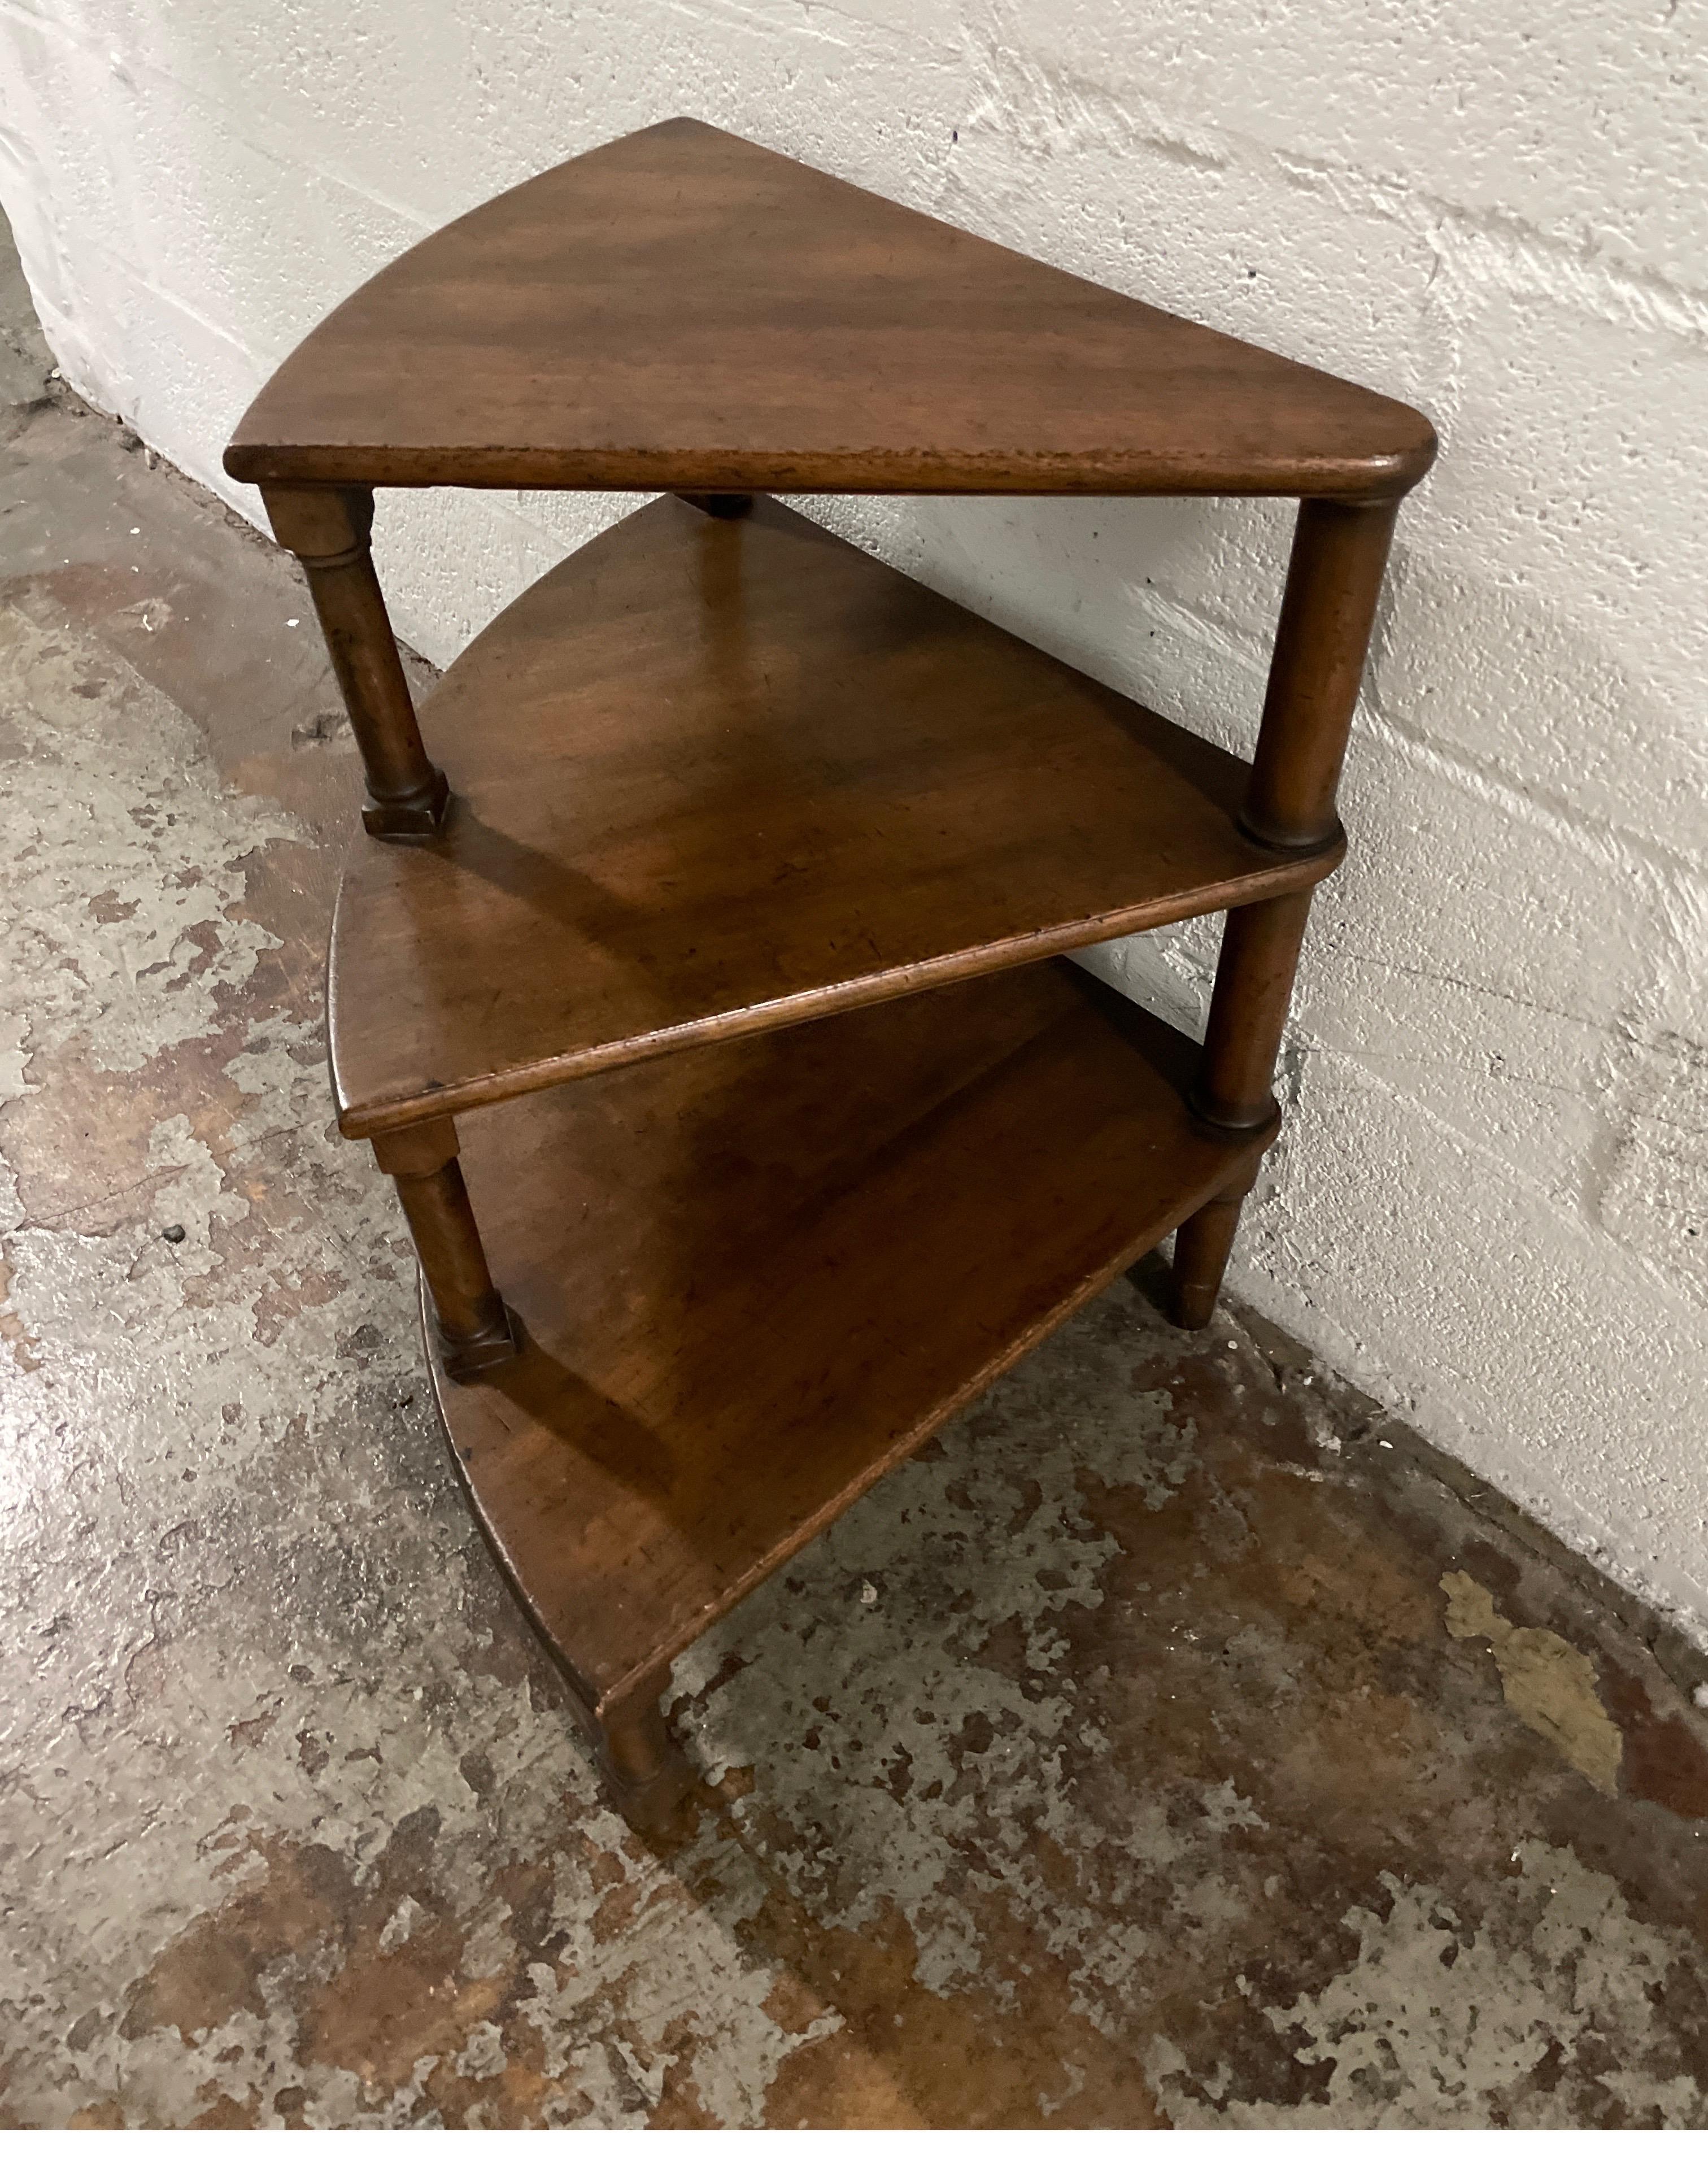 Vintage library step table by Kittinger.